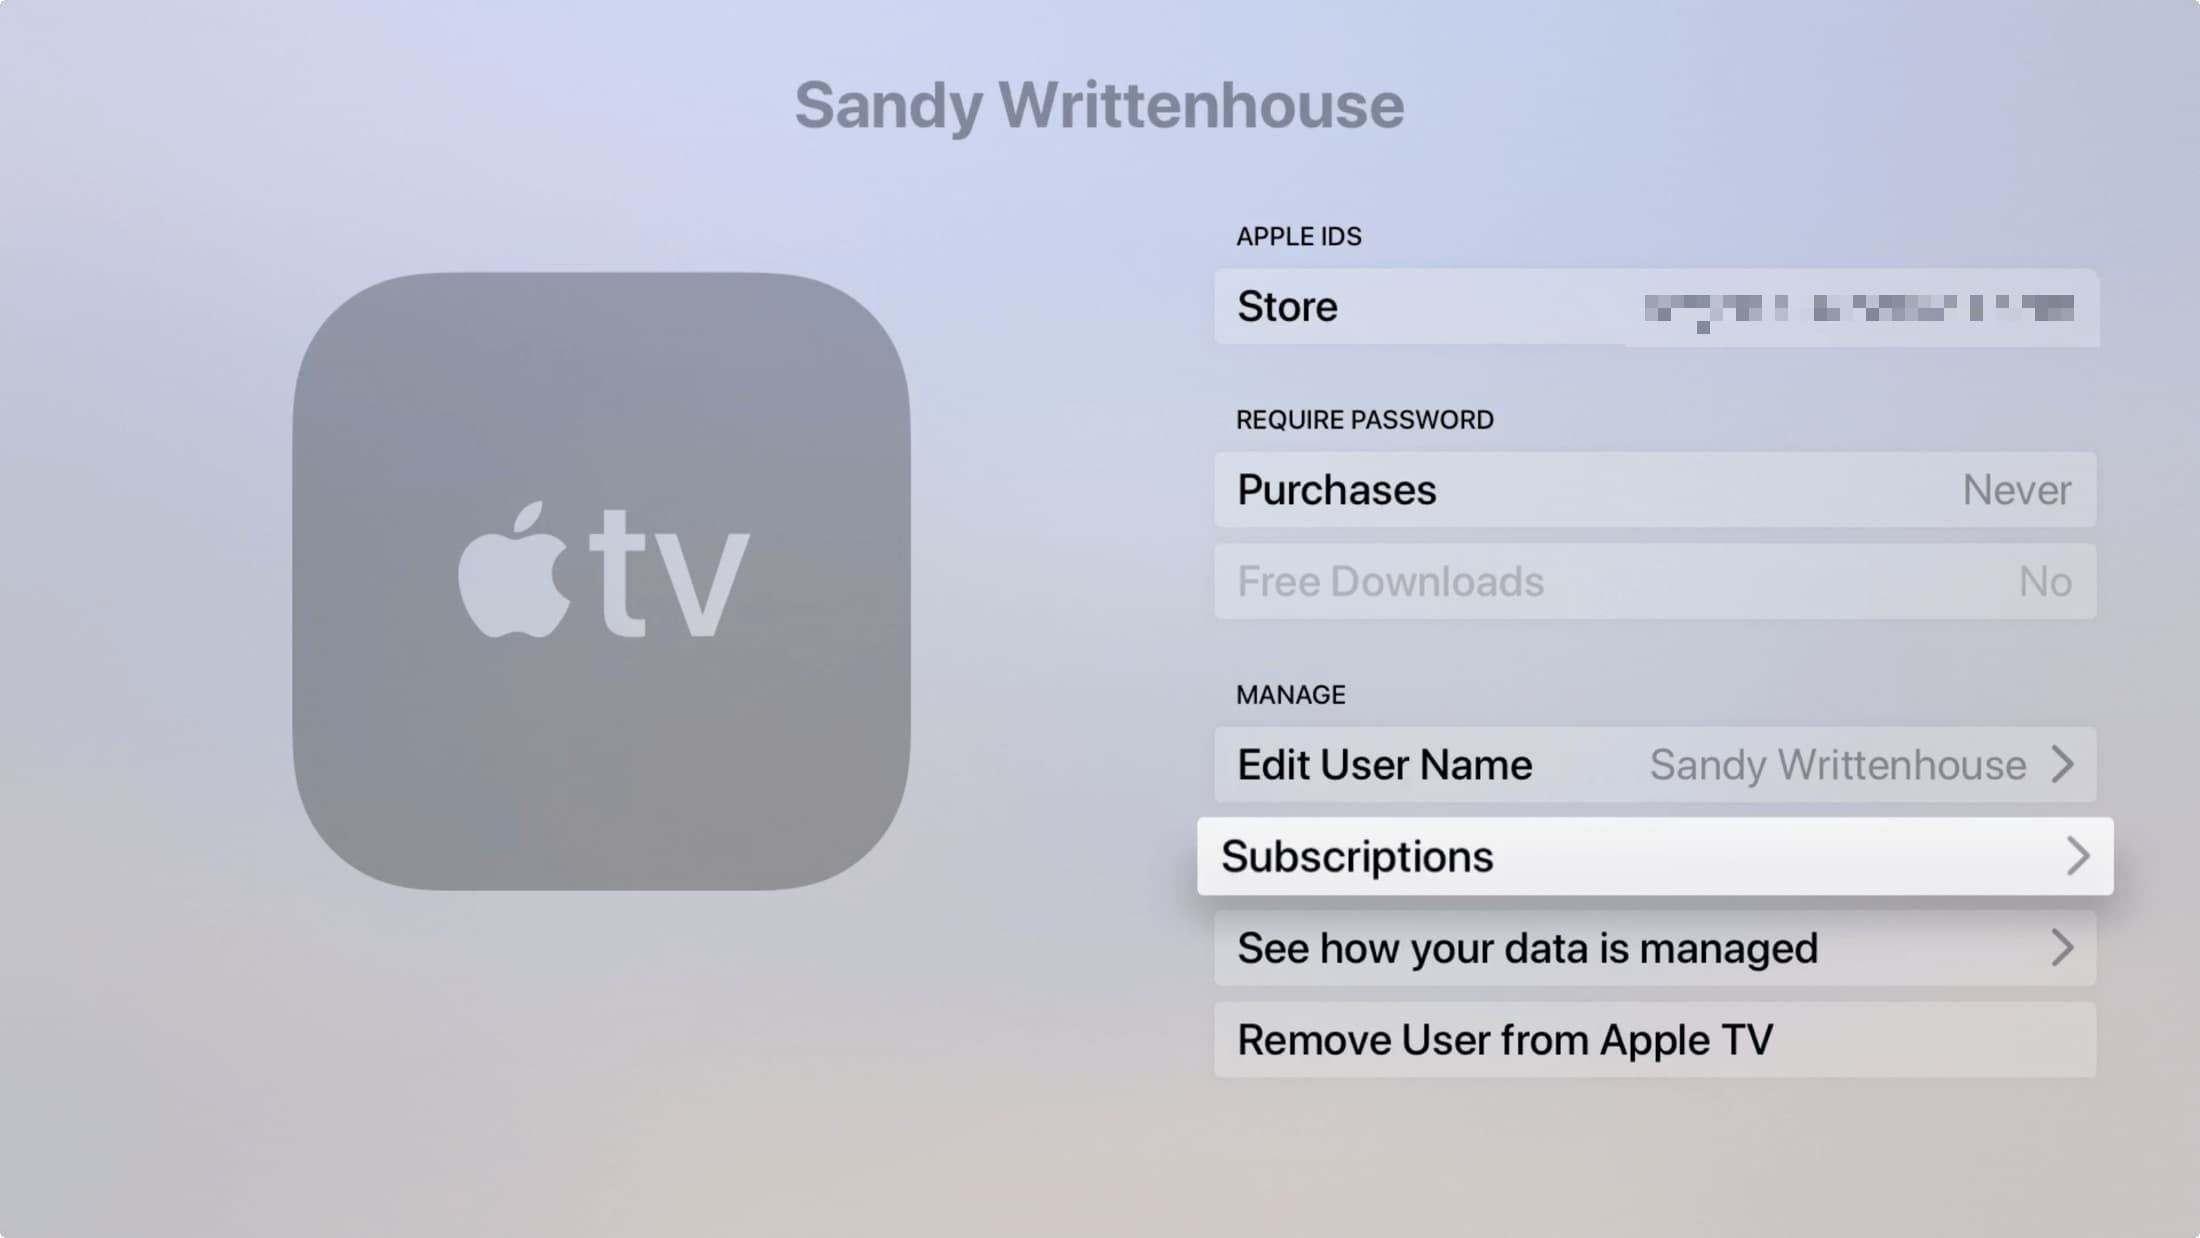 to cancel your Apple TV+ subscription